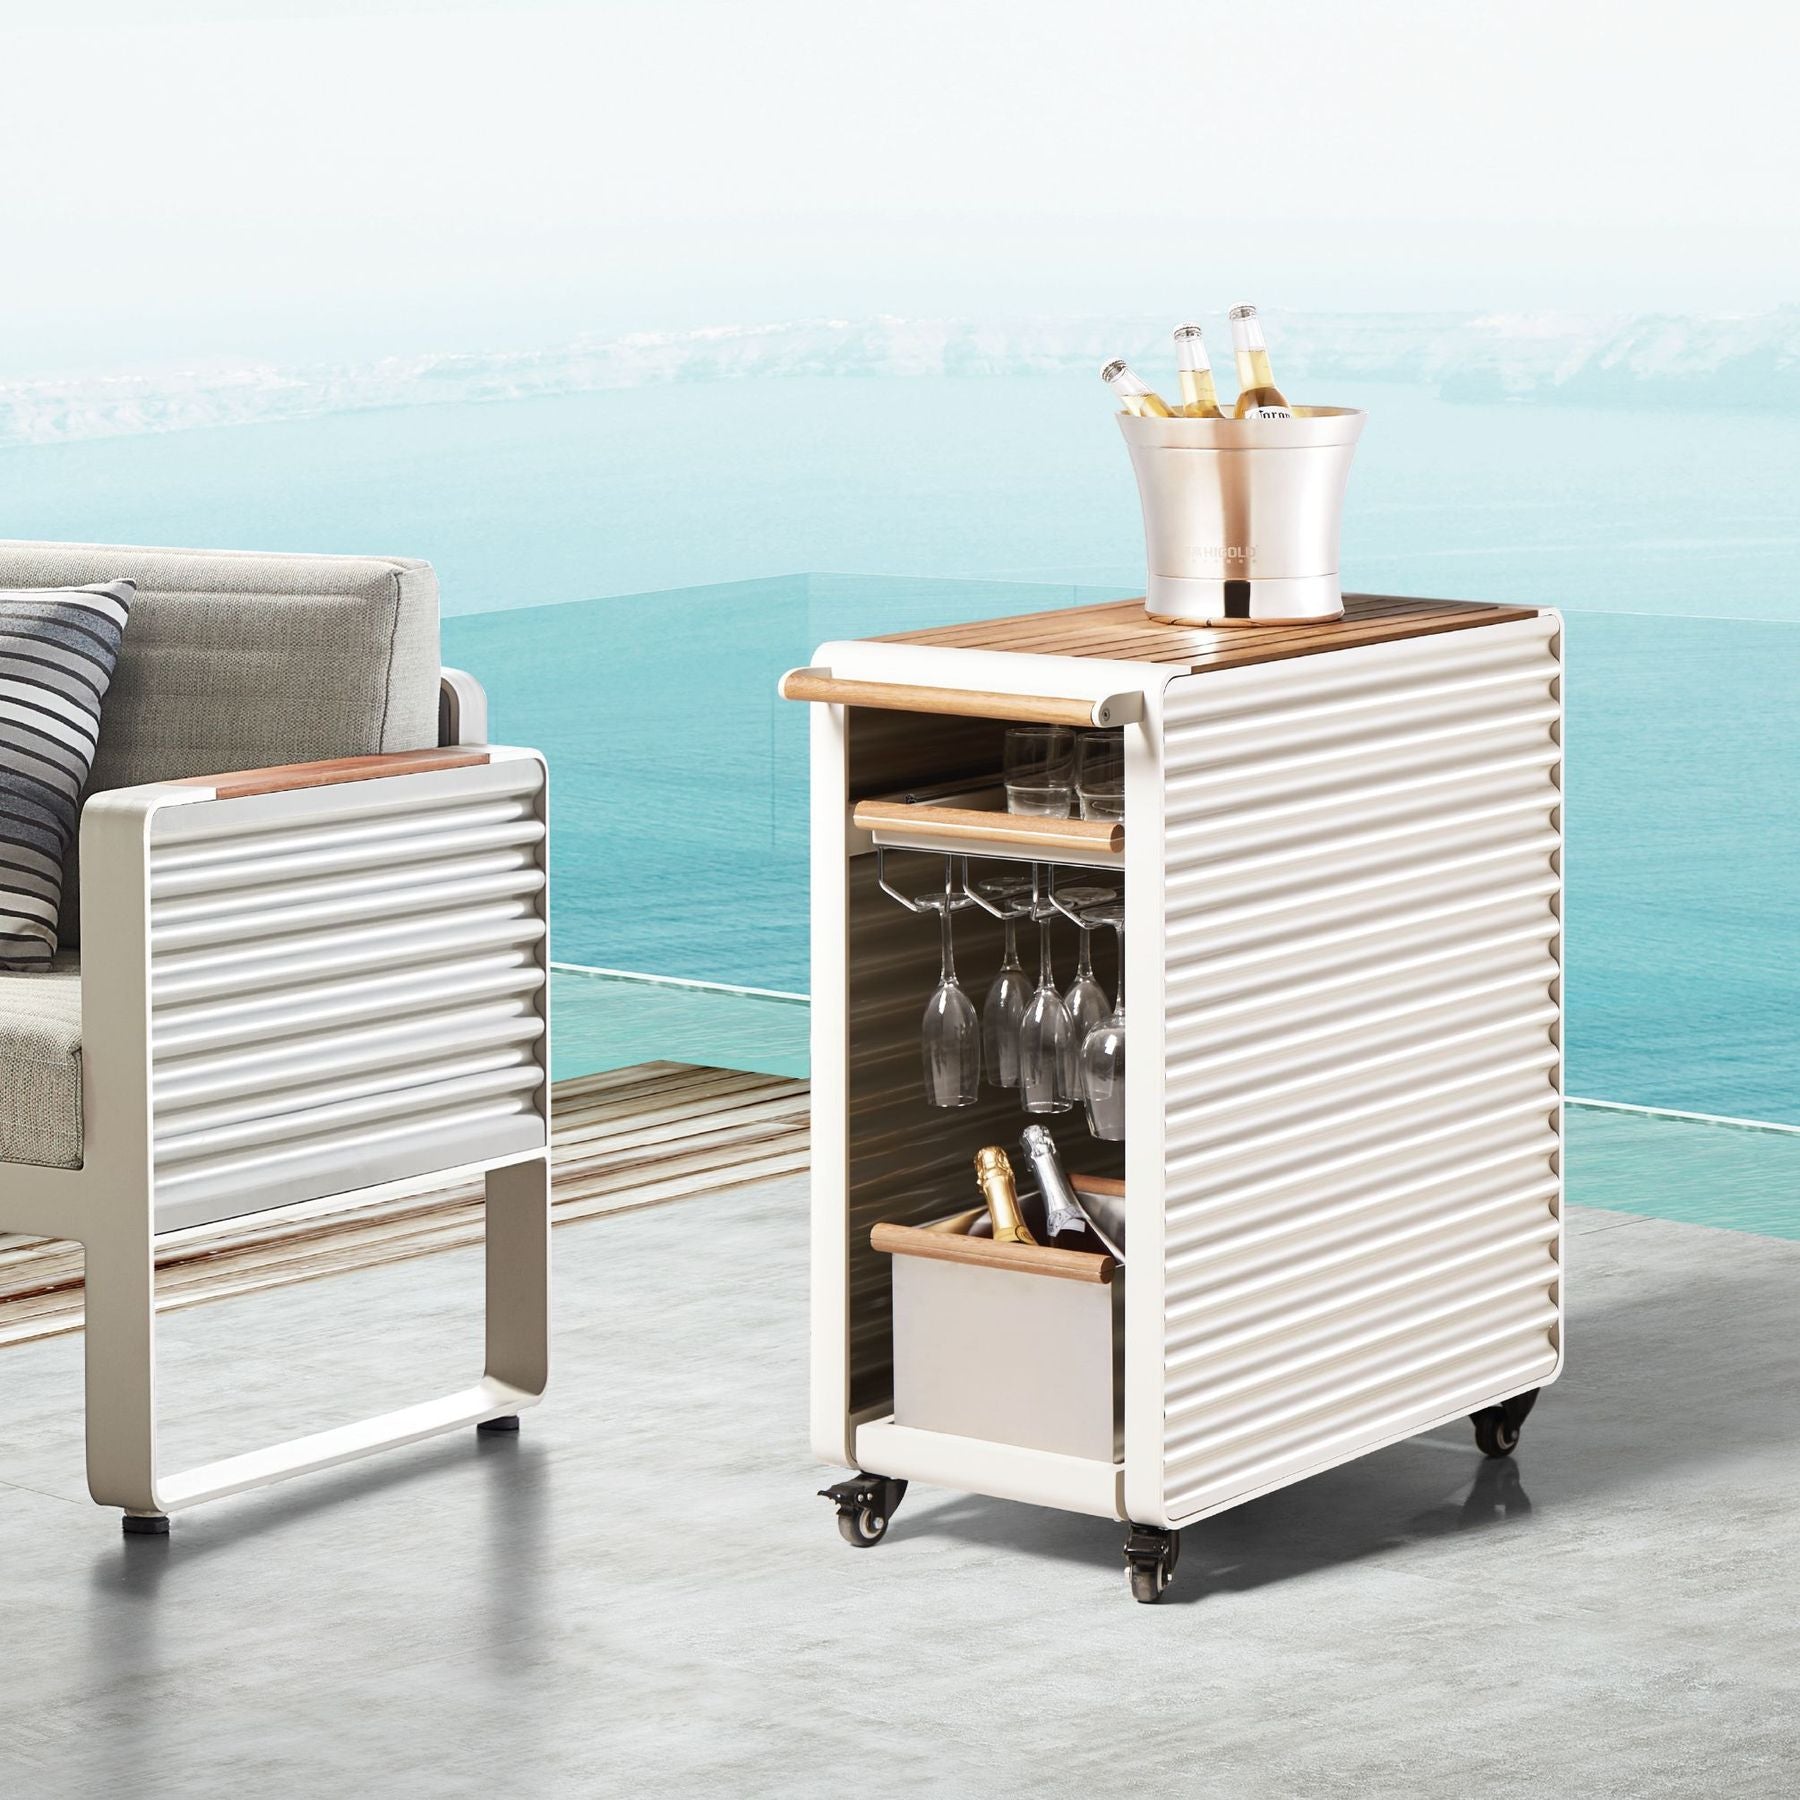 Airport Drinks Trolley - PadioLiving - Airport Drinks Trolley - Outdoor Drinks Trolley - PadioLiving